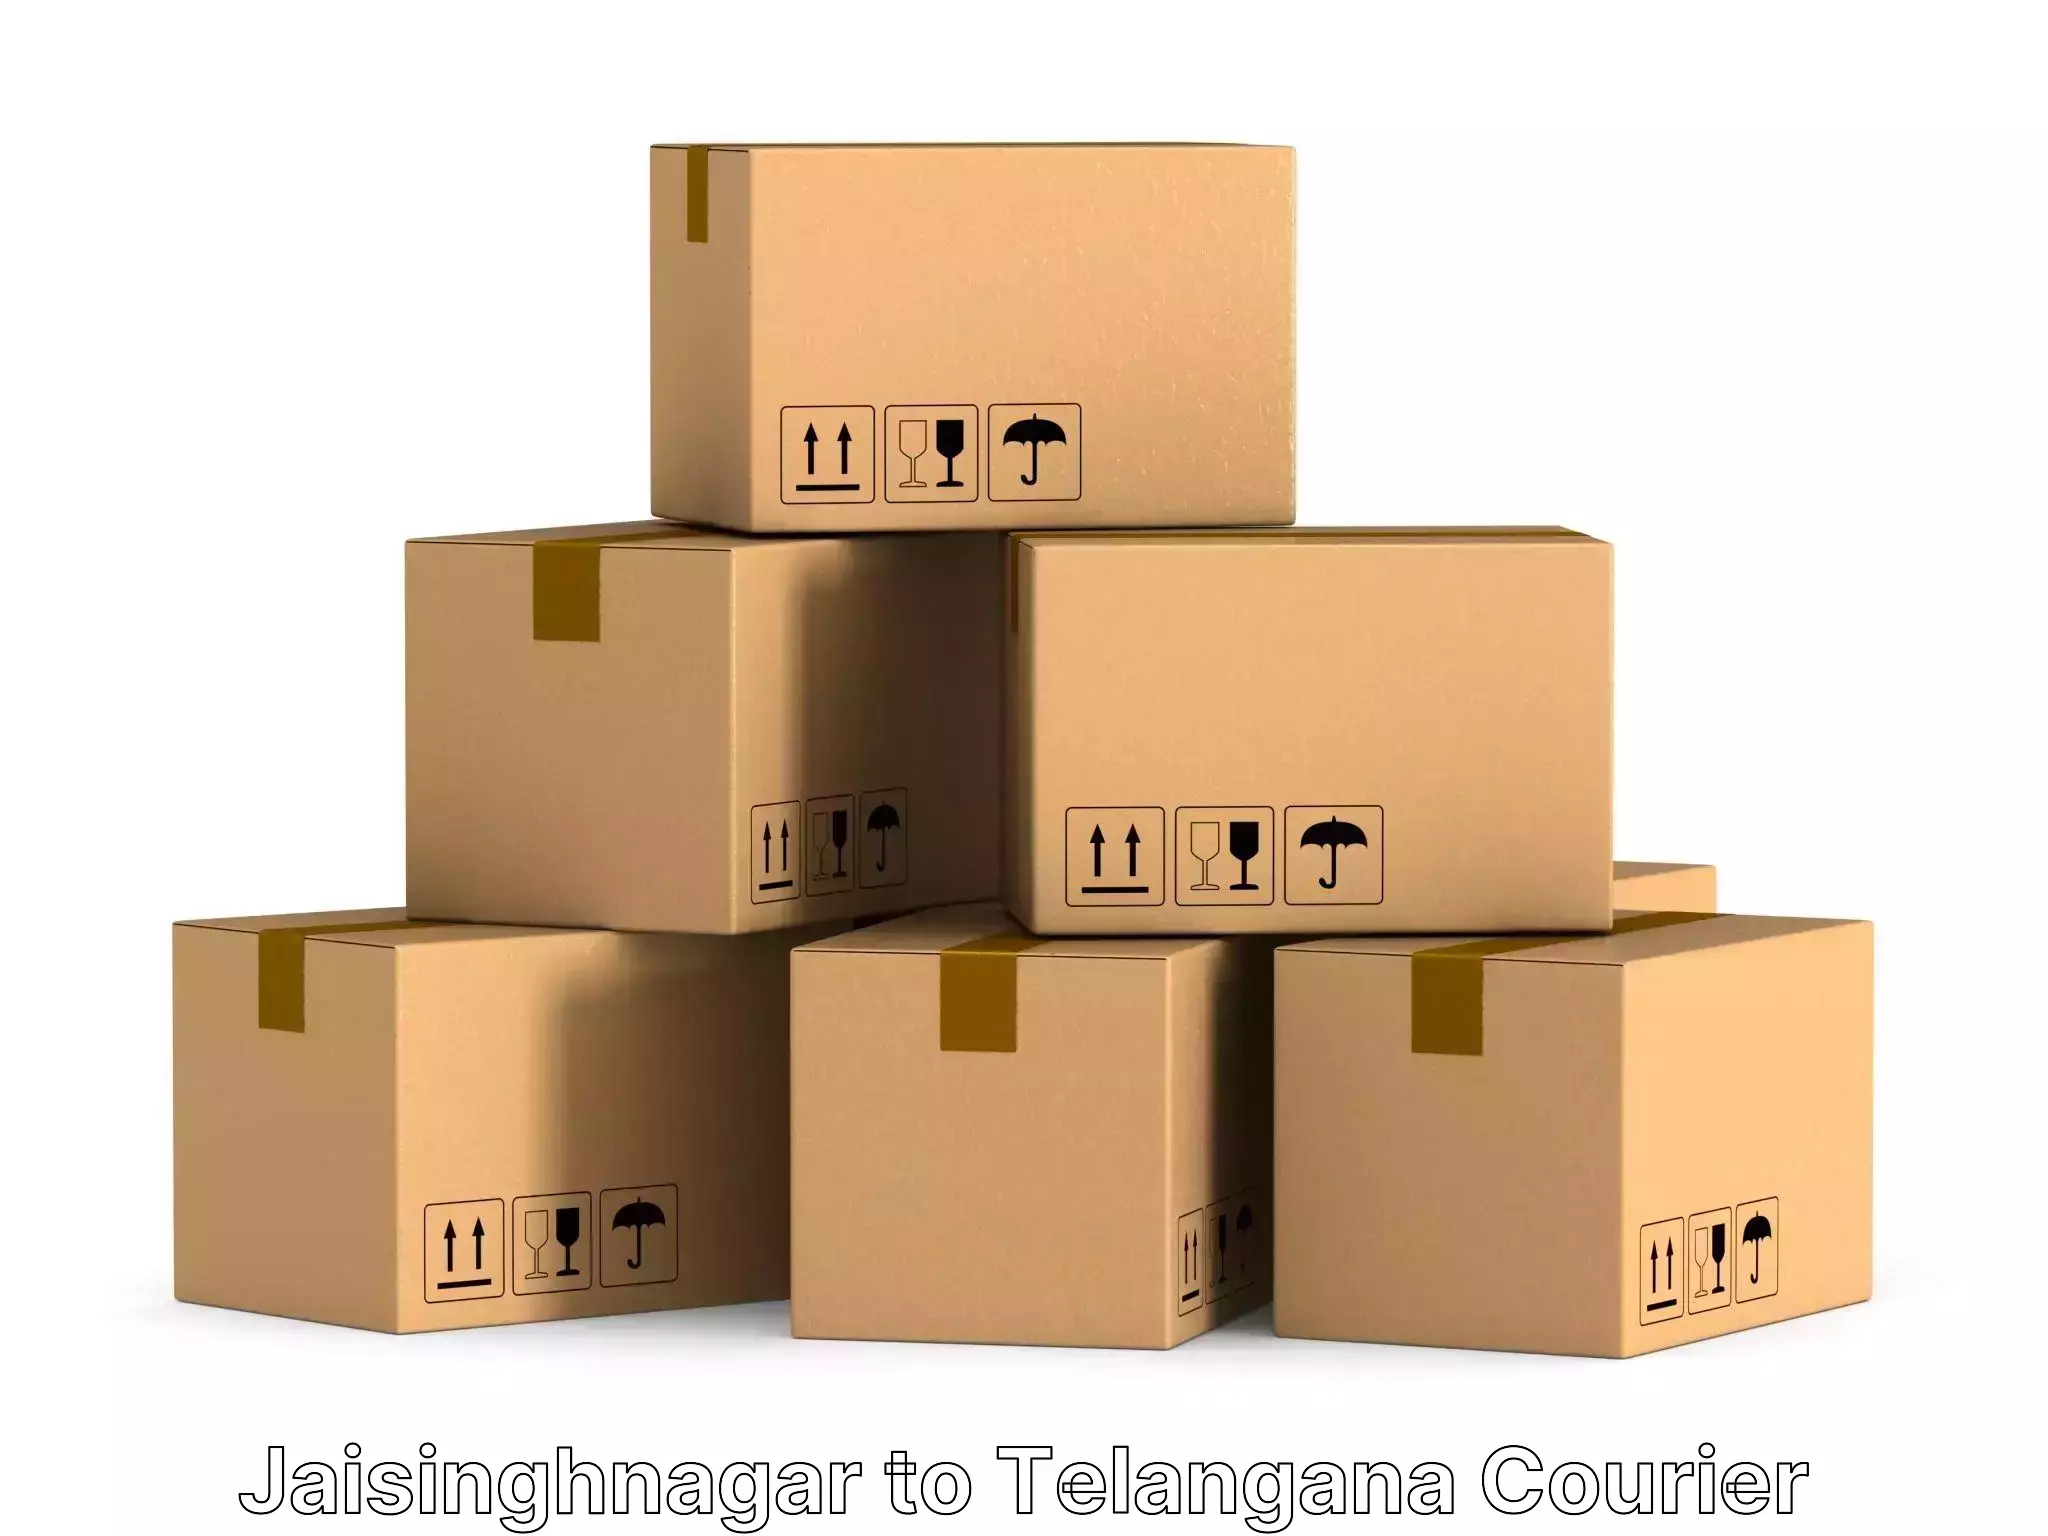 Moving and packing experts Jaisinghnagar to Hyderabad